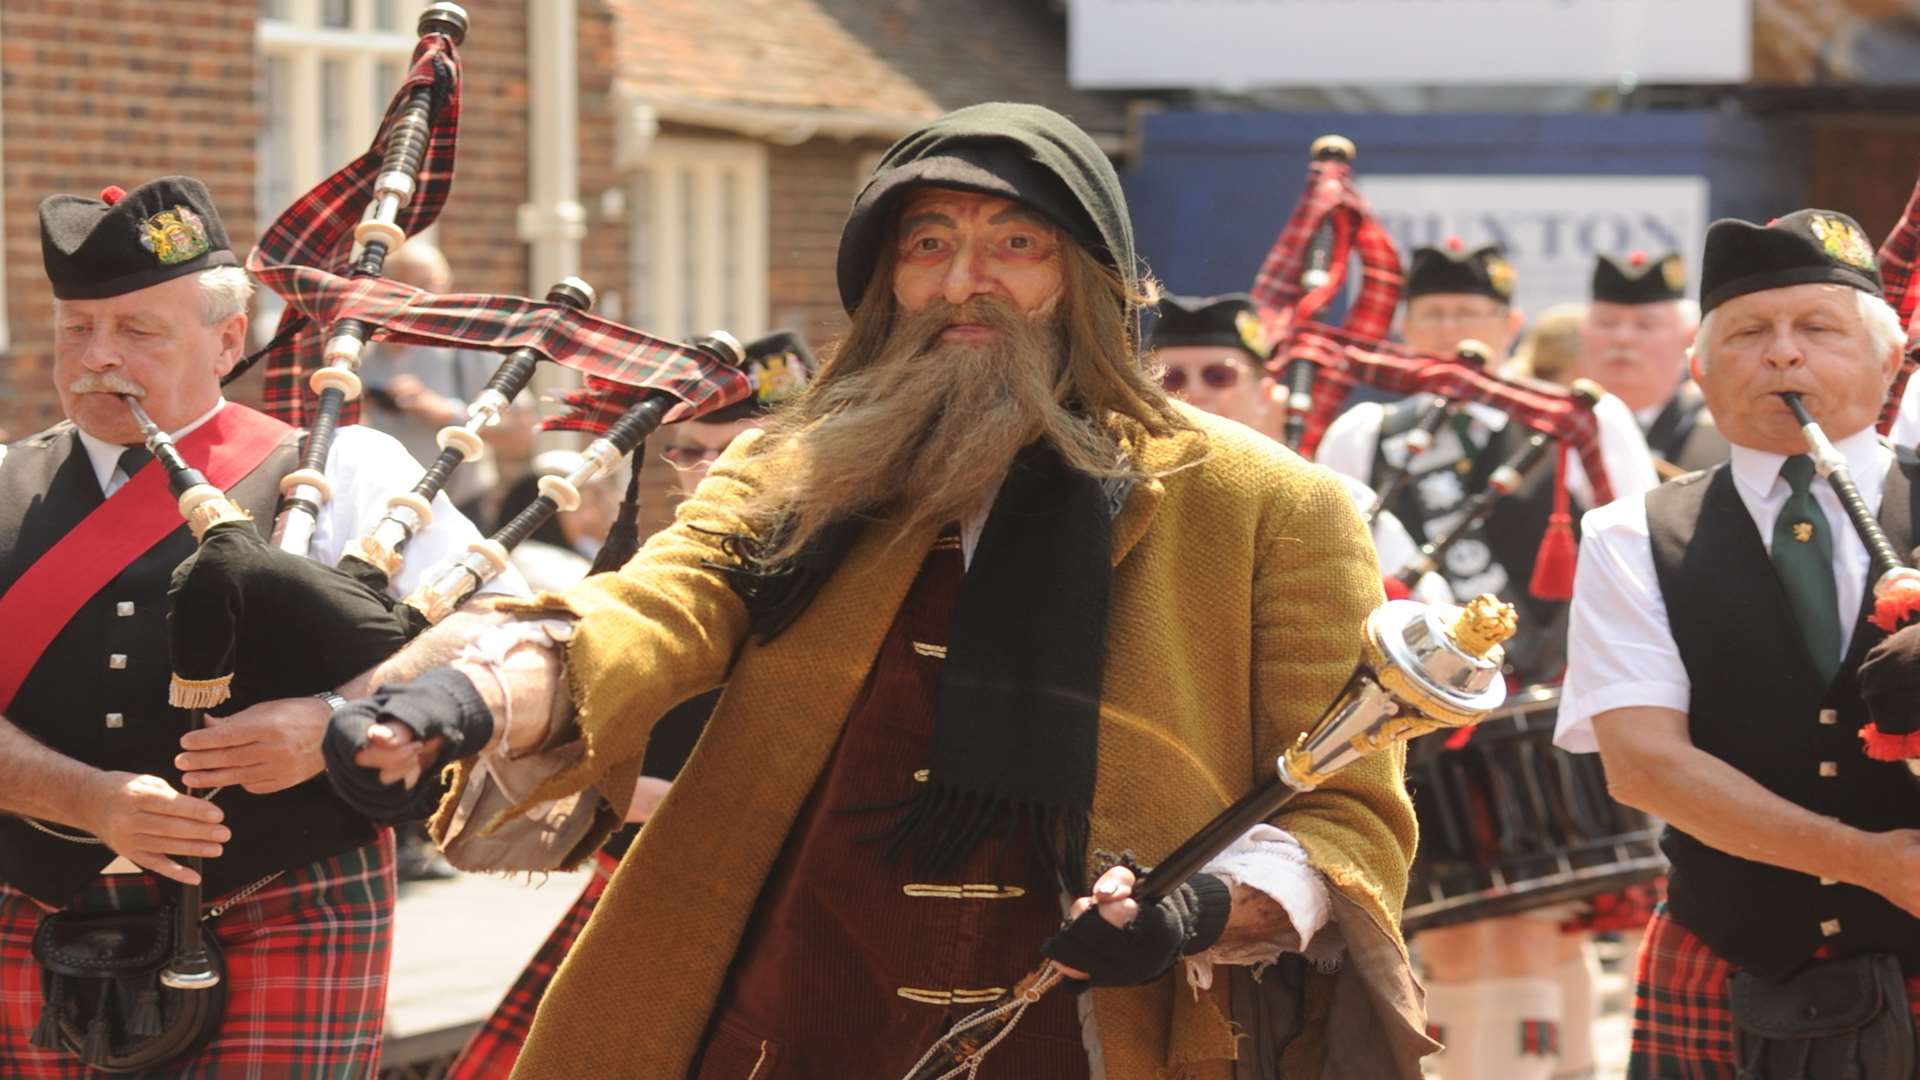 Fagin leads the parade in Rochester High Street Picture: Steve Crispe